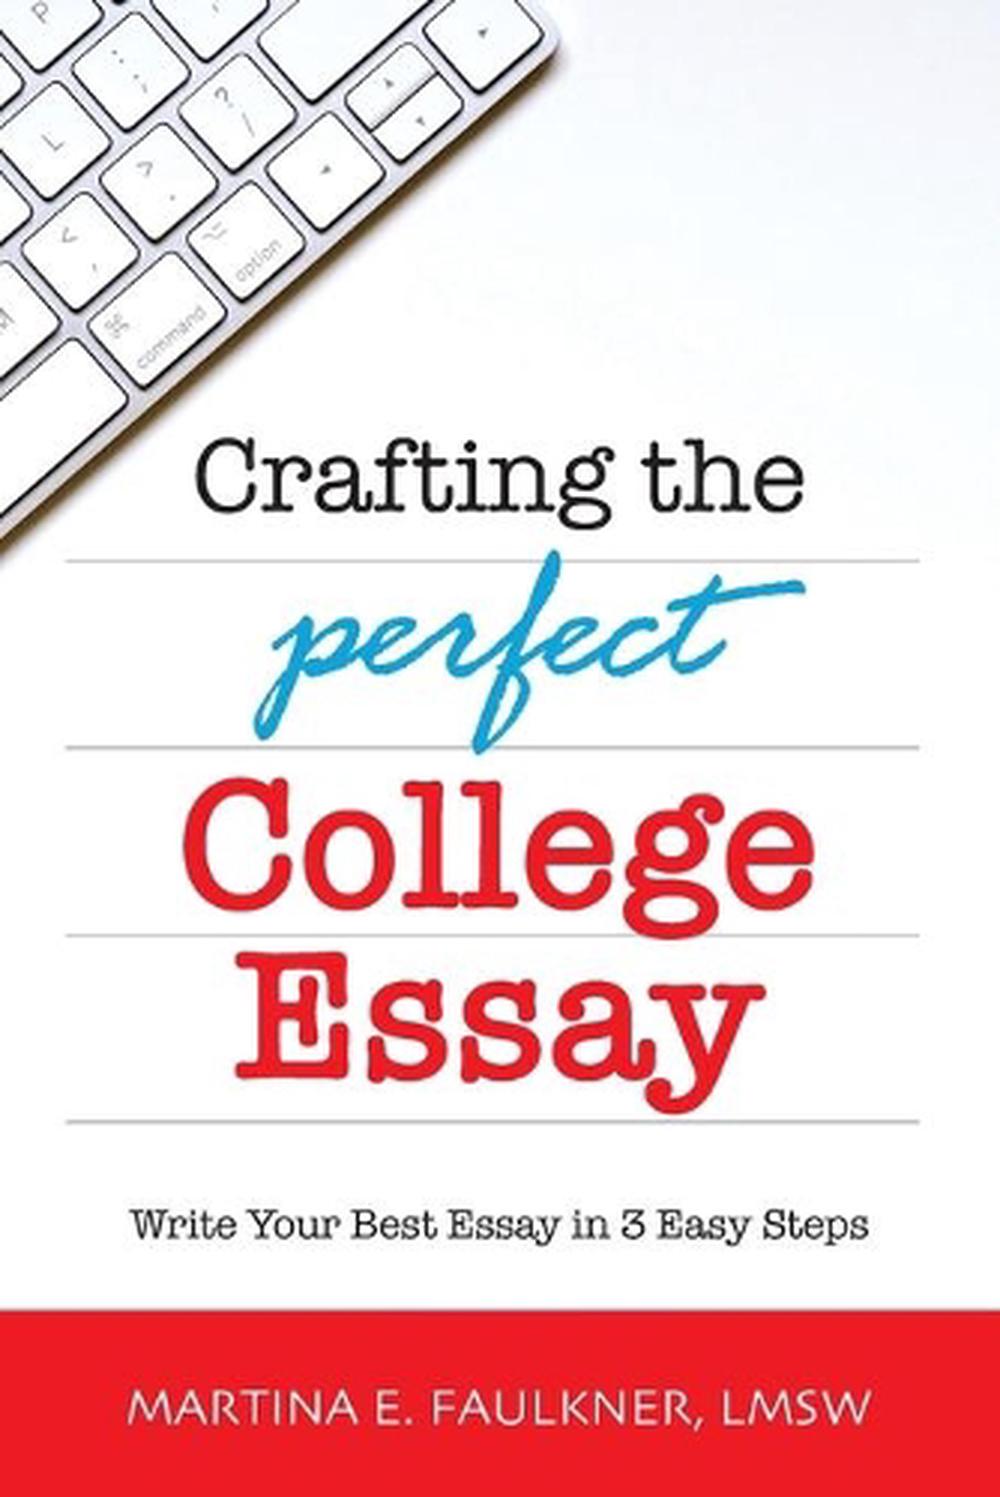 how to write the perfect college essay zombies